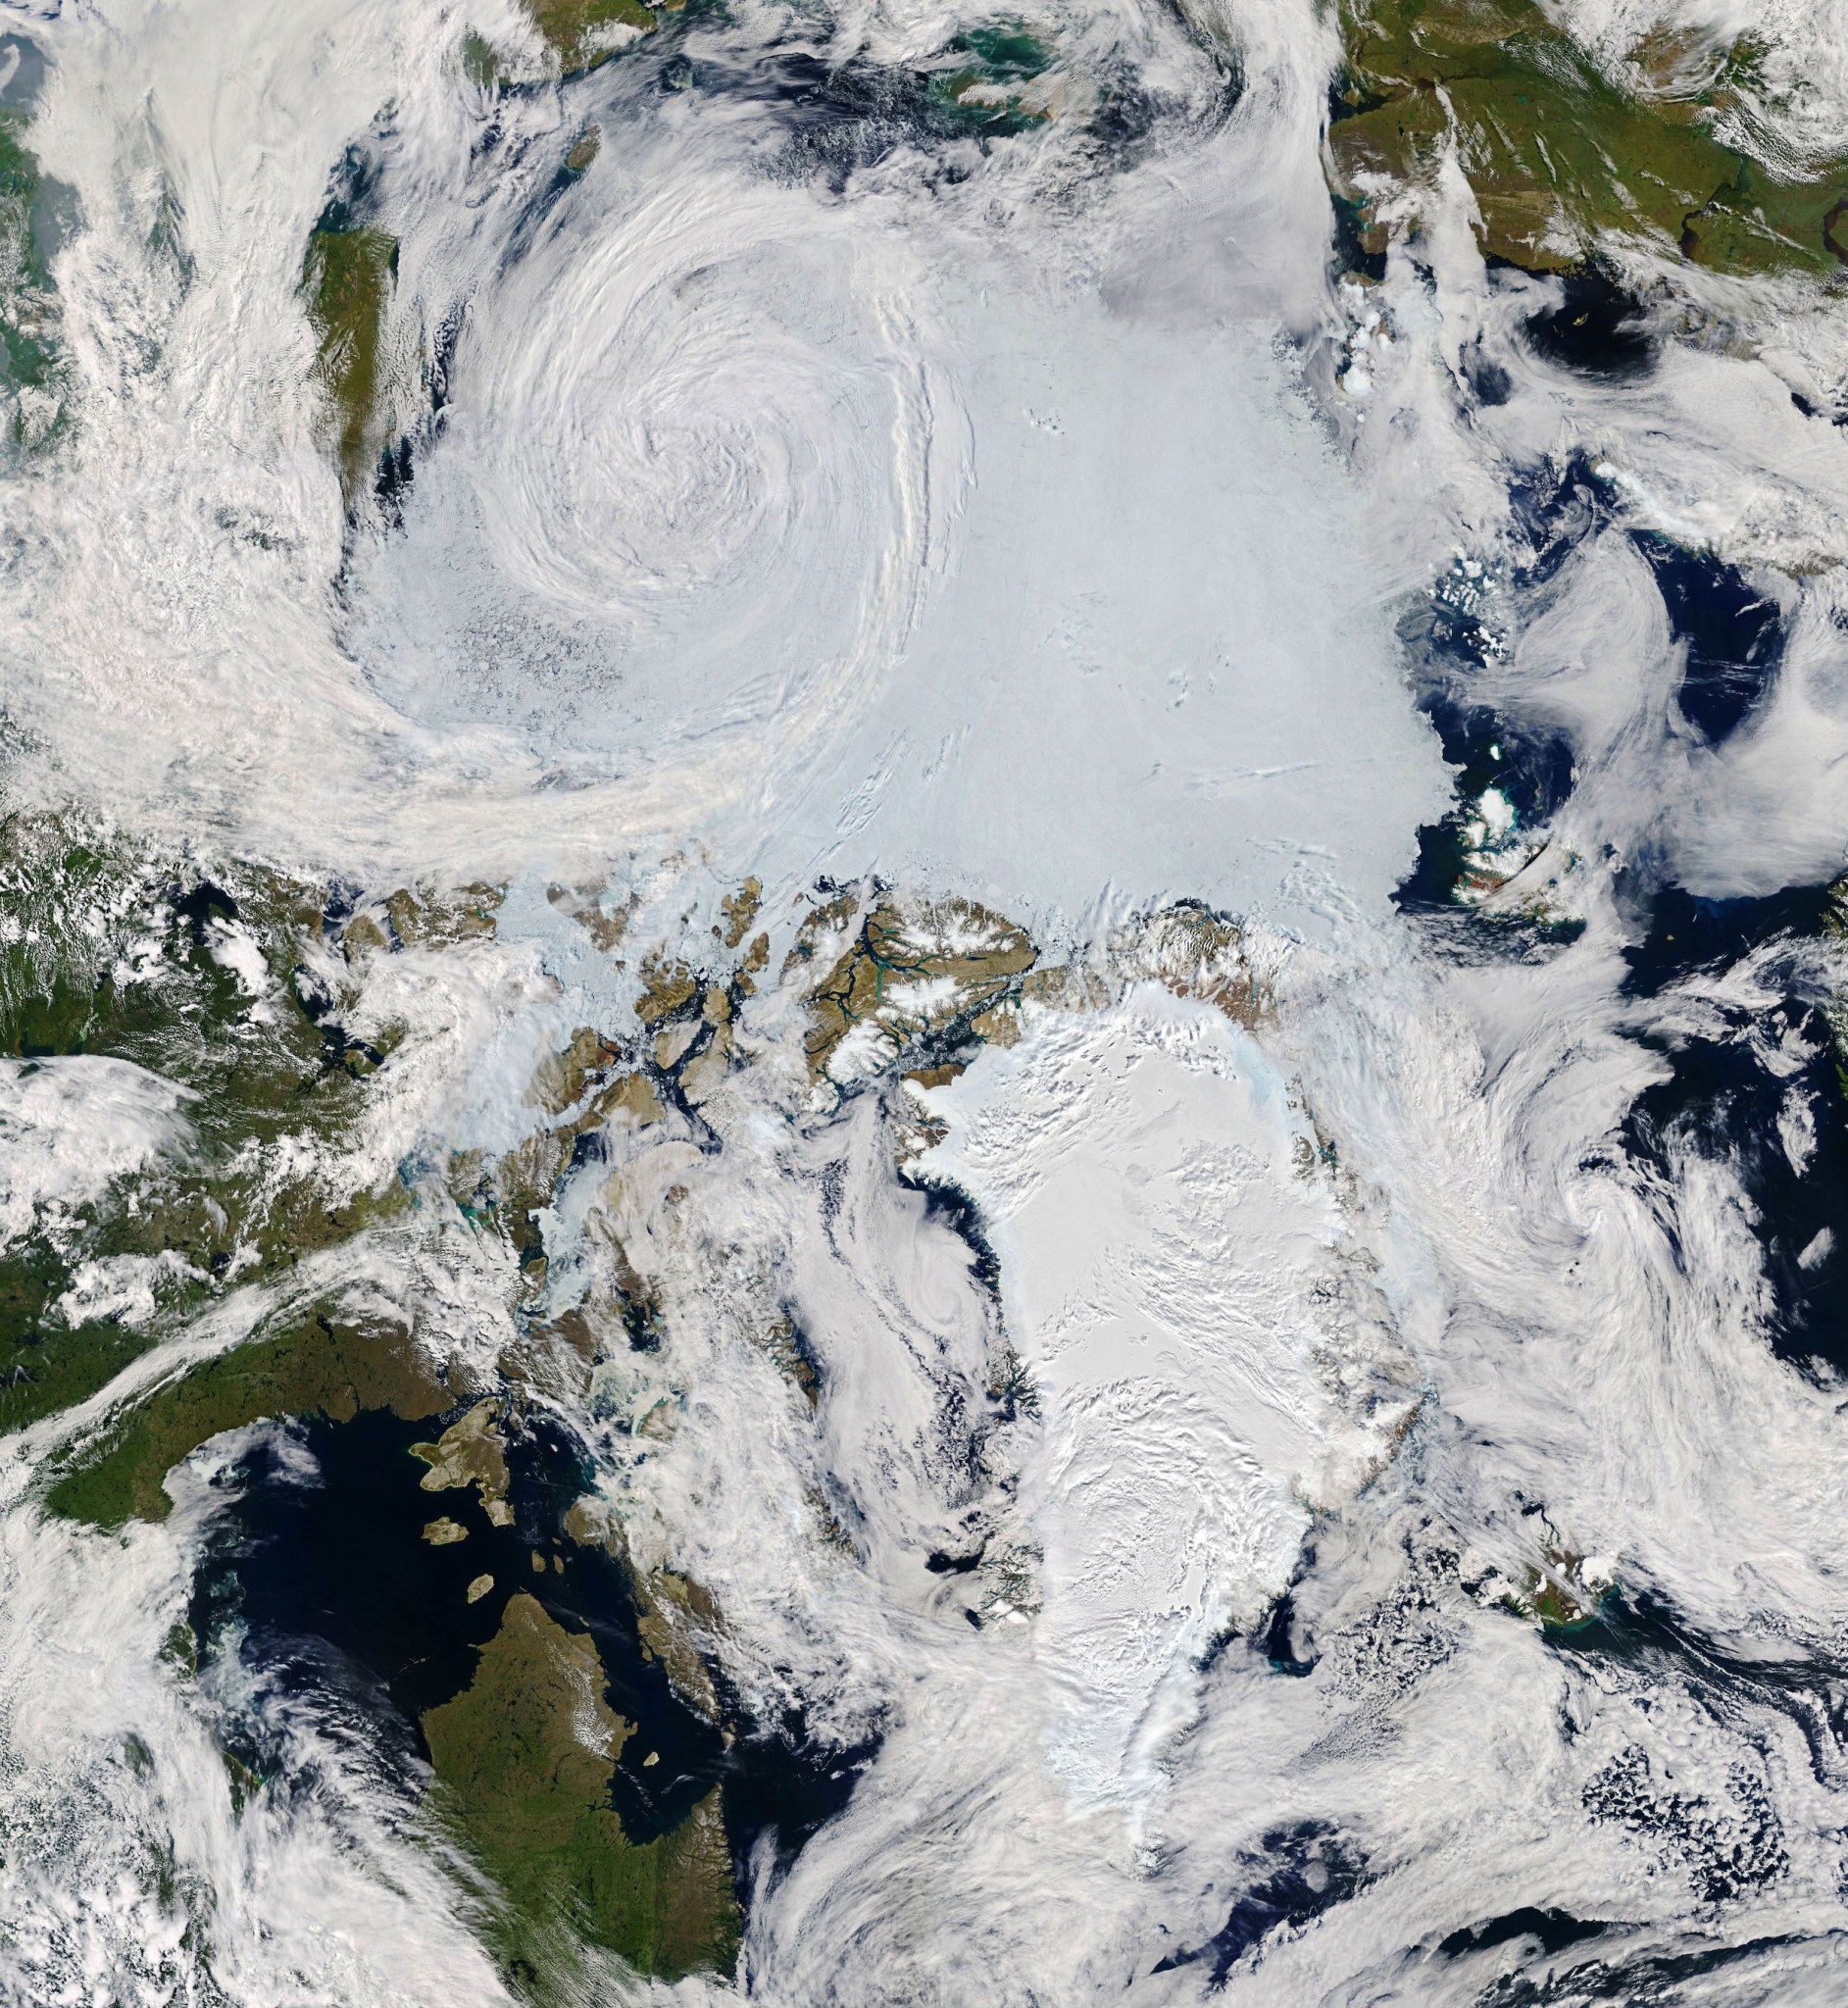 An image of an Arctic cyclone swirling over the Arctic Ocean on July 28, 2020, captured by the Moderate Resolution Imaging Spectroradiometer (MODIS) on NASA’s Terra and Aqua satellites.